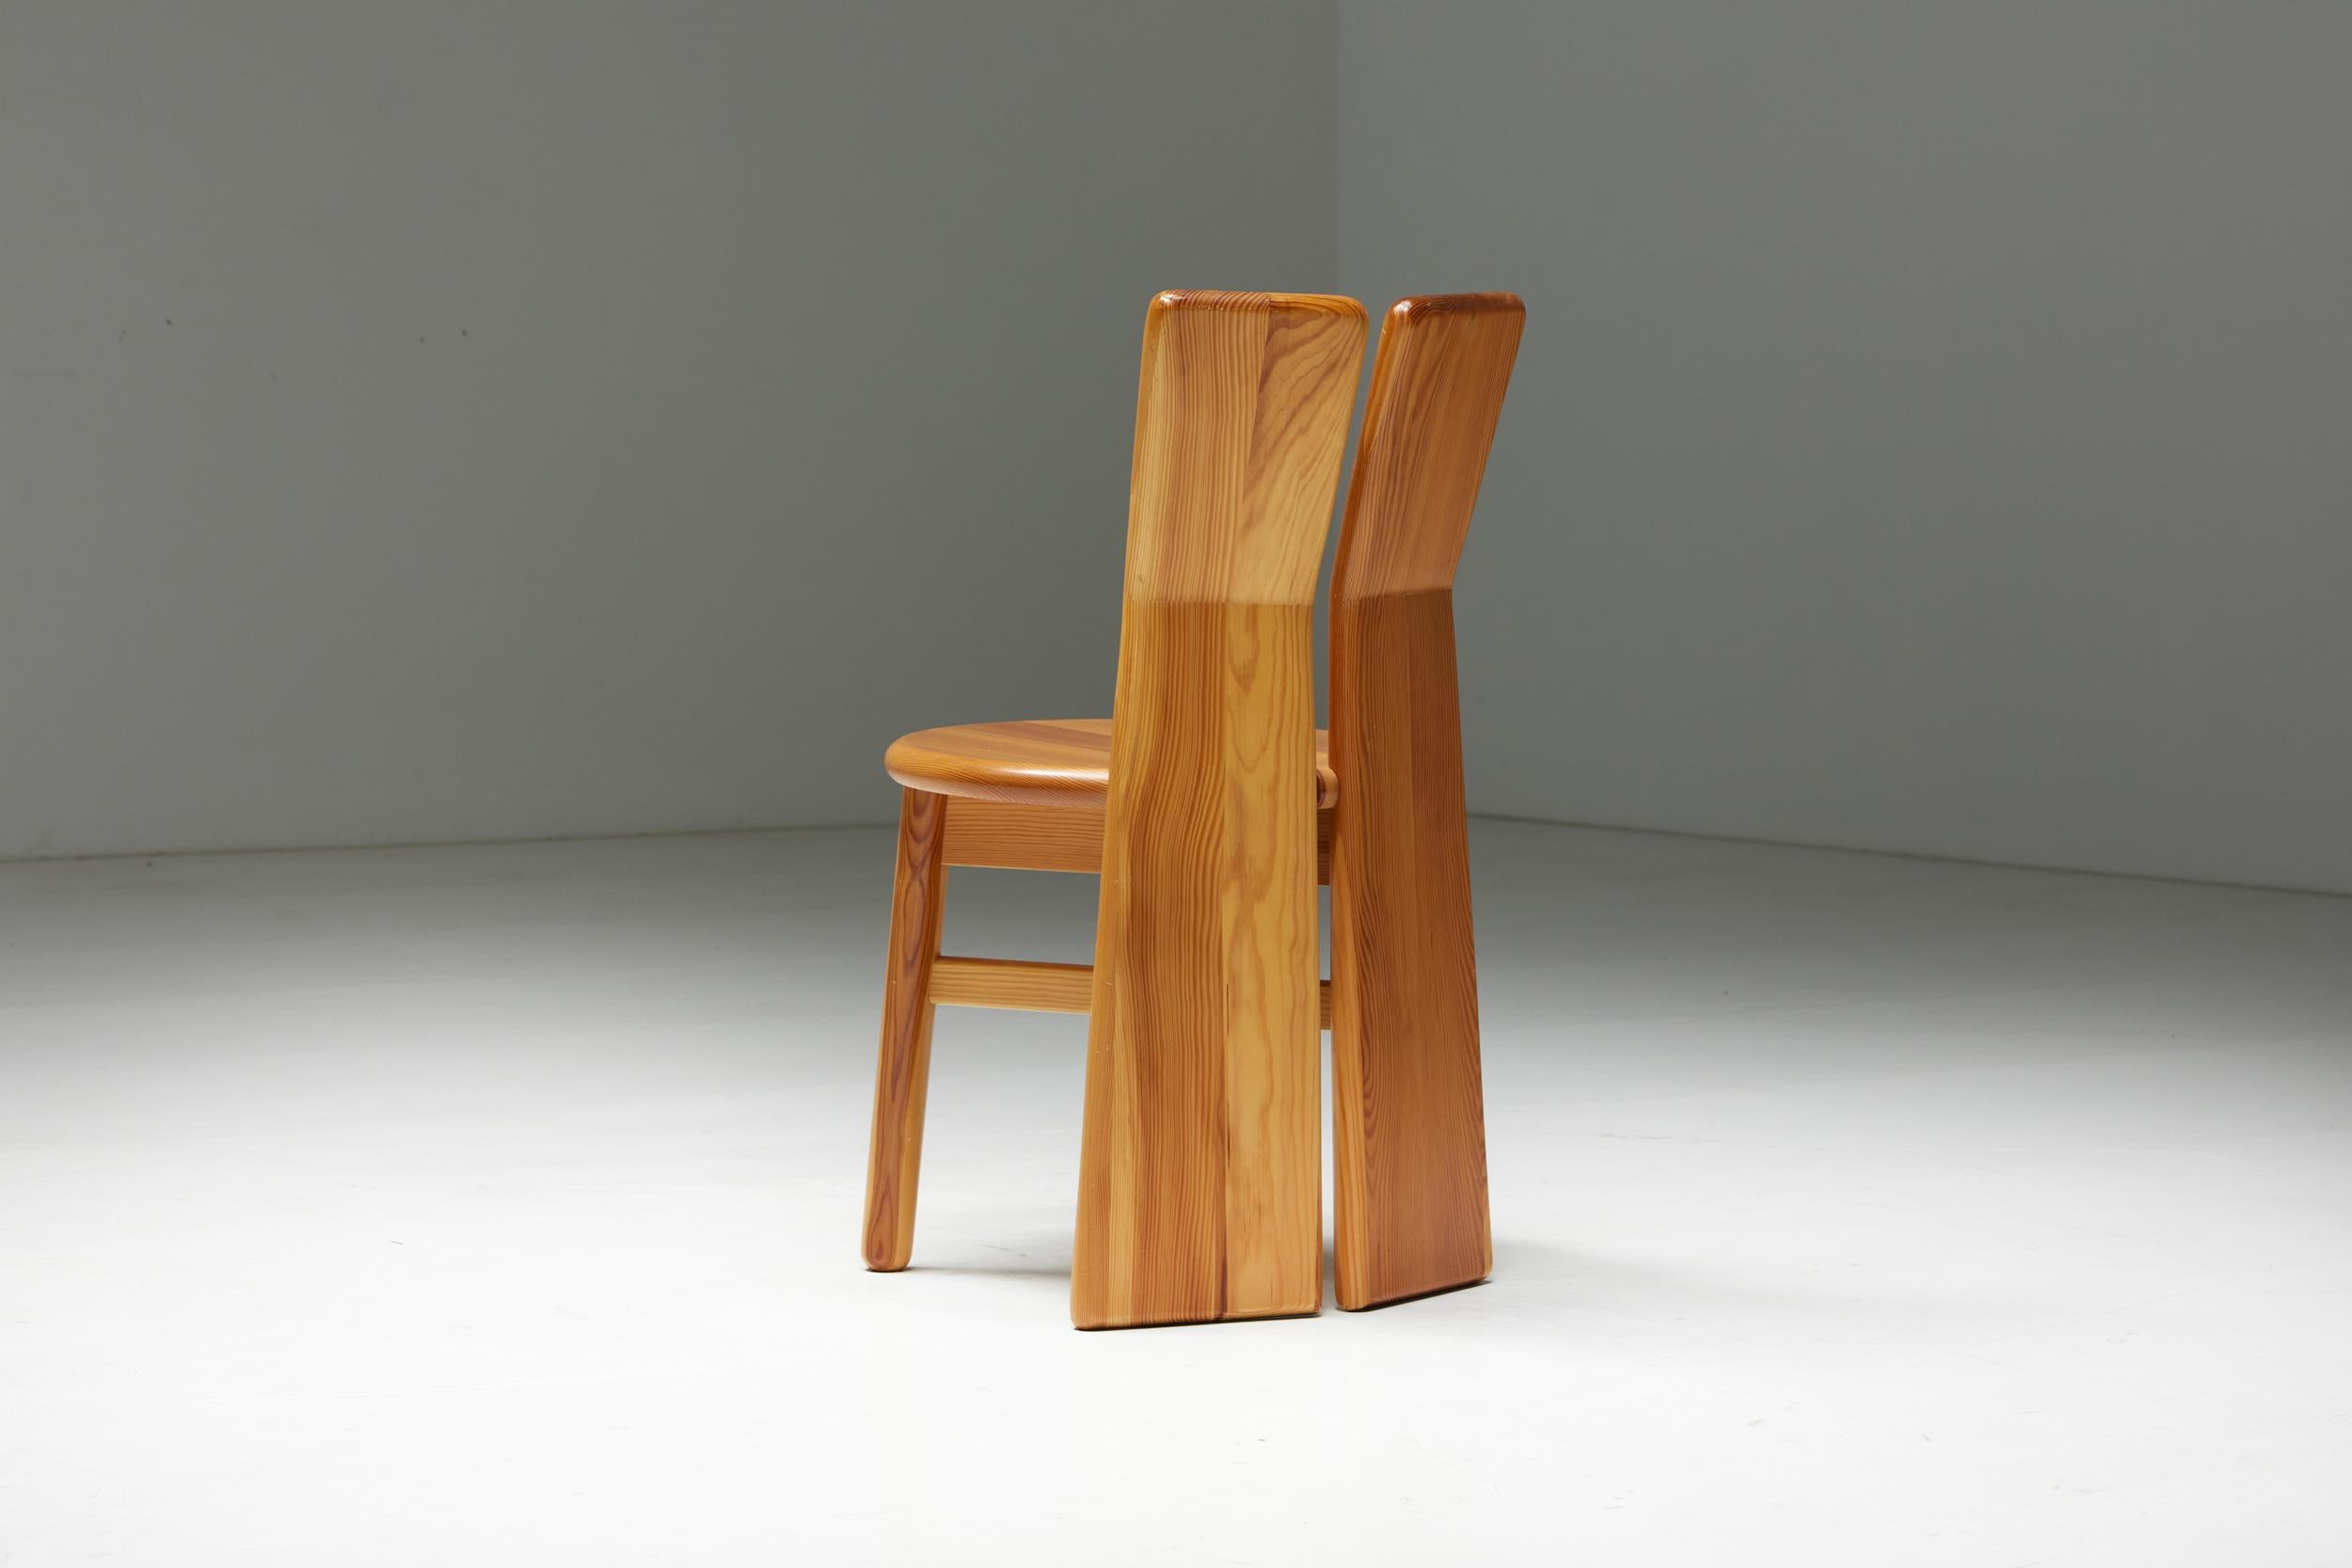 Italian Brutalist Pine Dining Chairs, Italy, 1970s For Sale 5